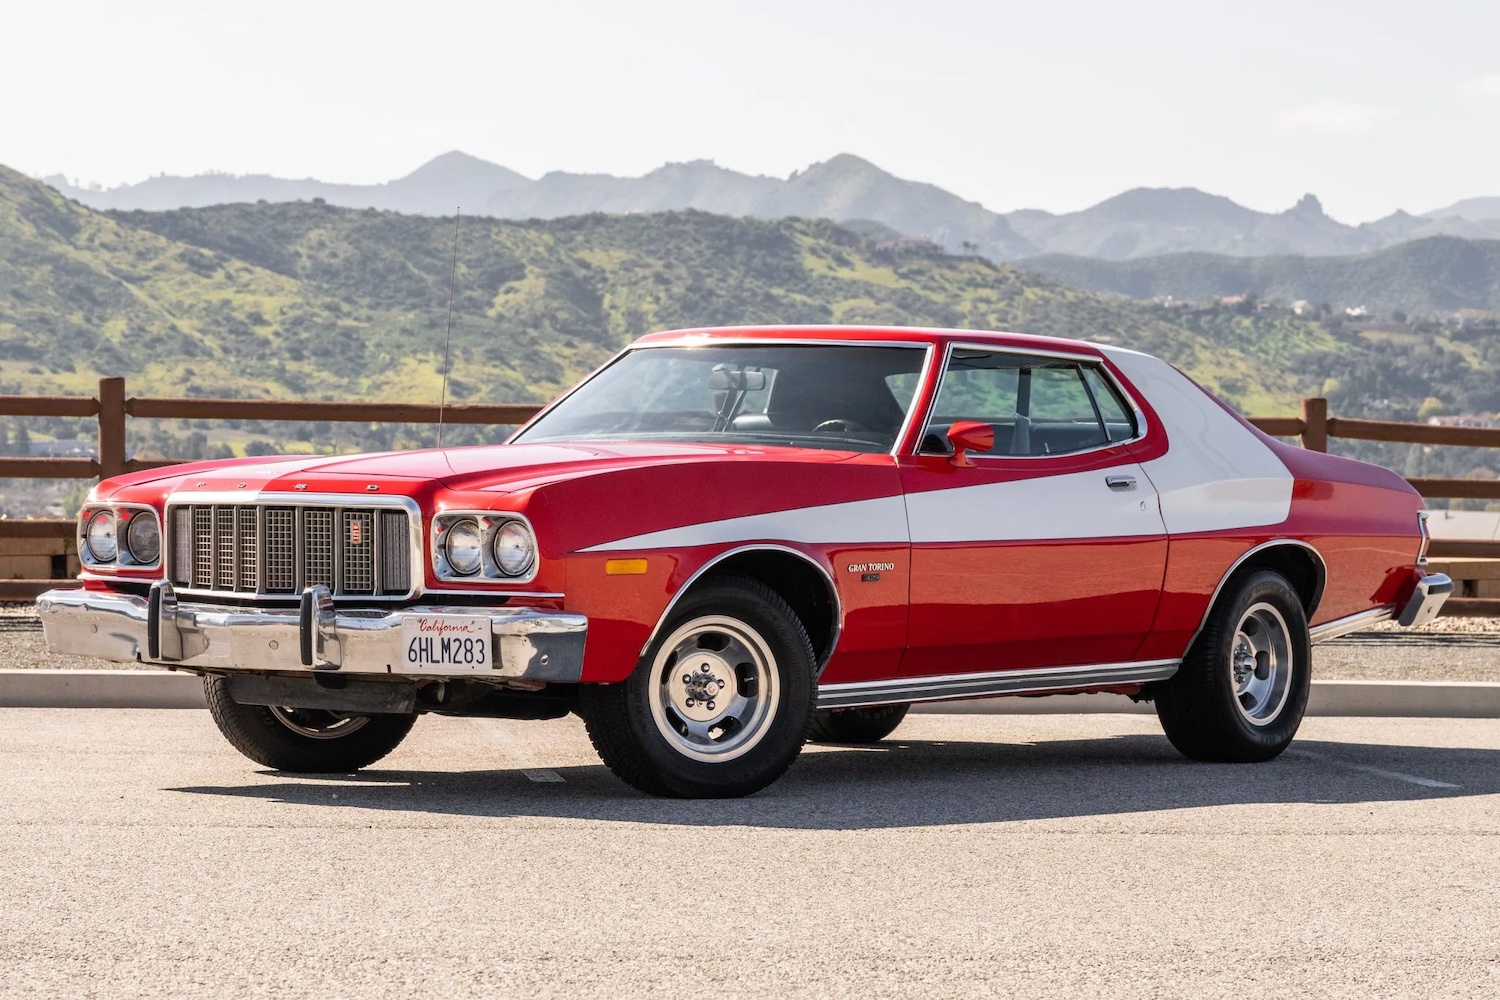 1976 Ford Gran Torino Featured in Starsky & Hutch Is Up for Sale